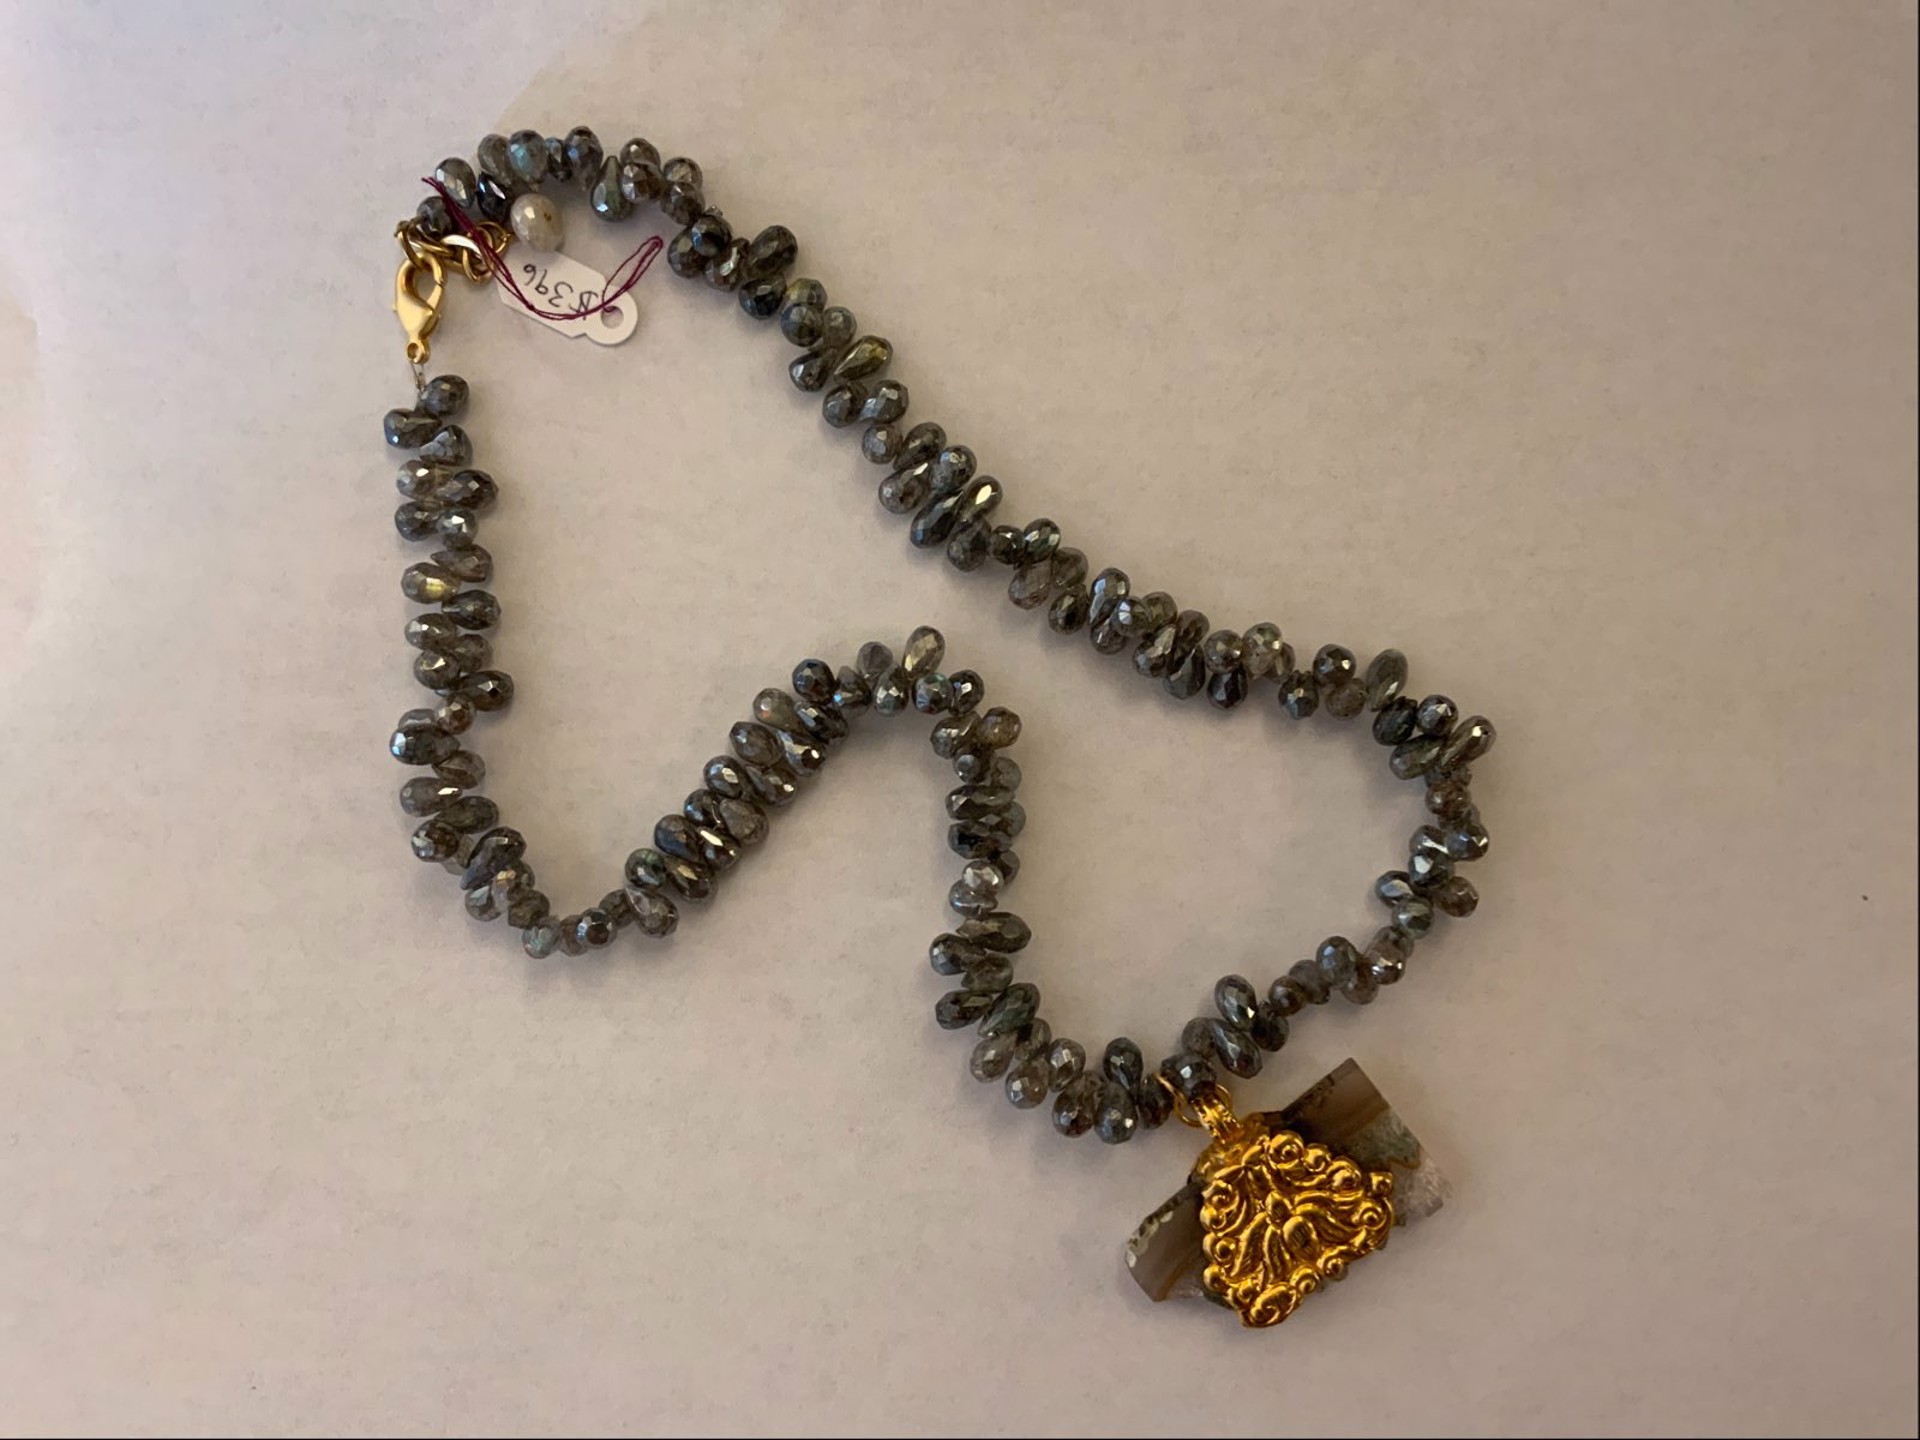 Faceted Labordorite Beads With Agate Pendant Necklace by Bittersweet Designs